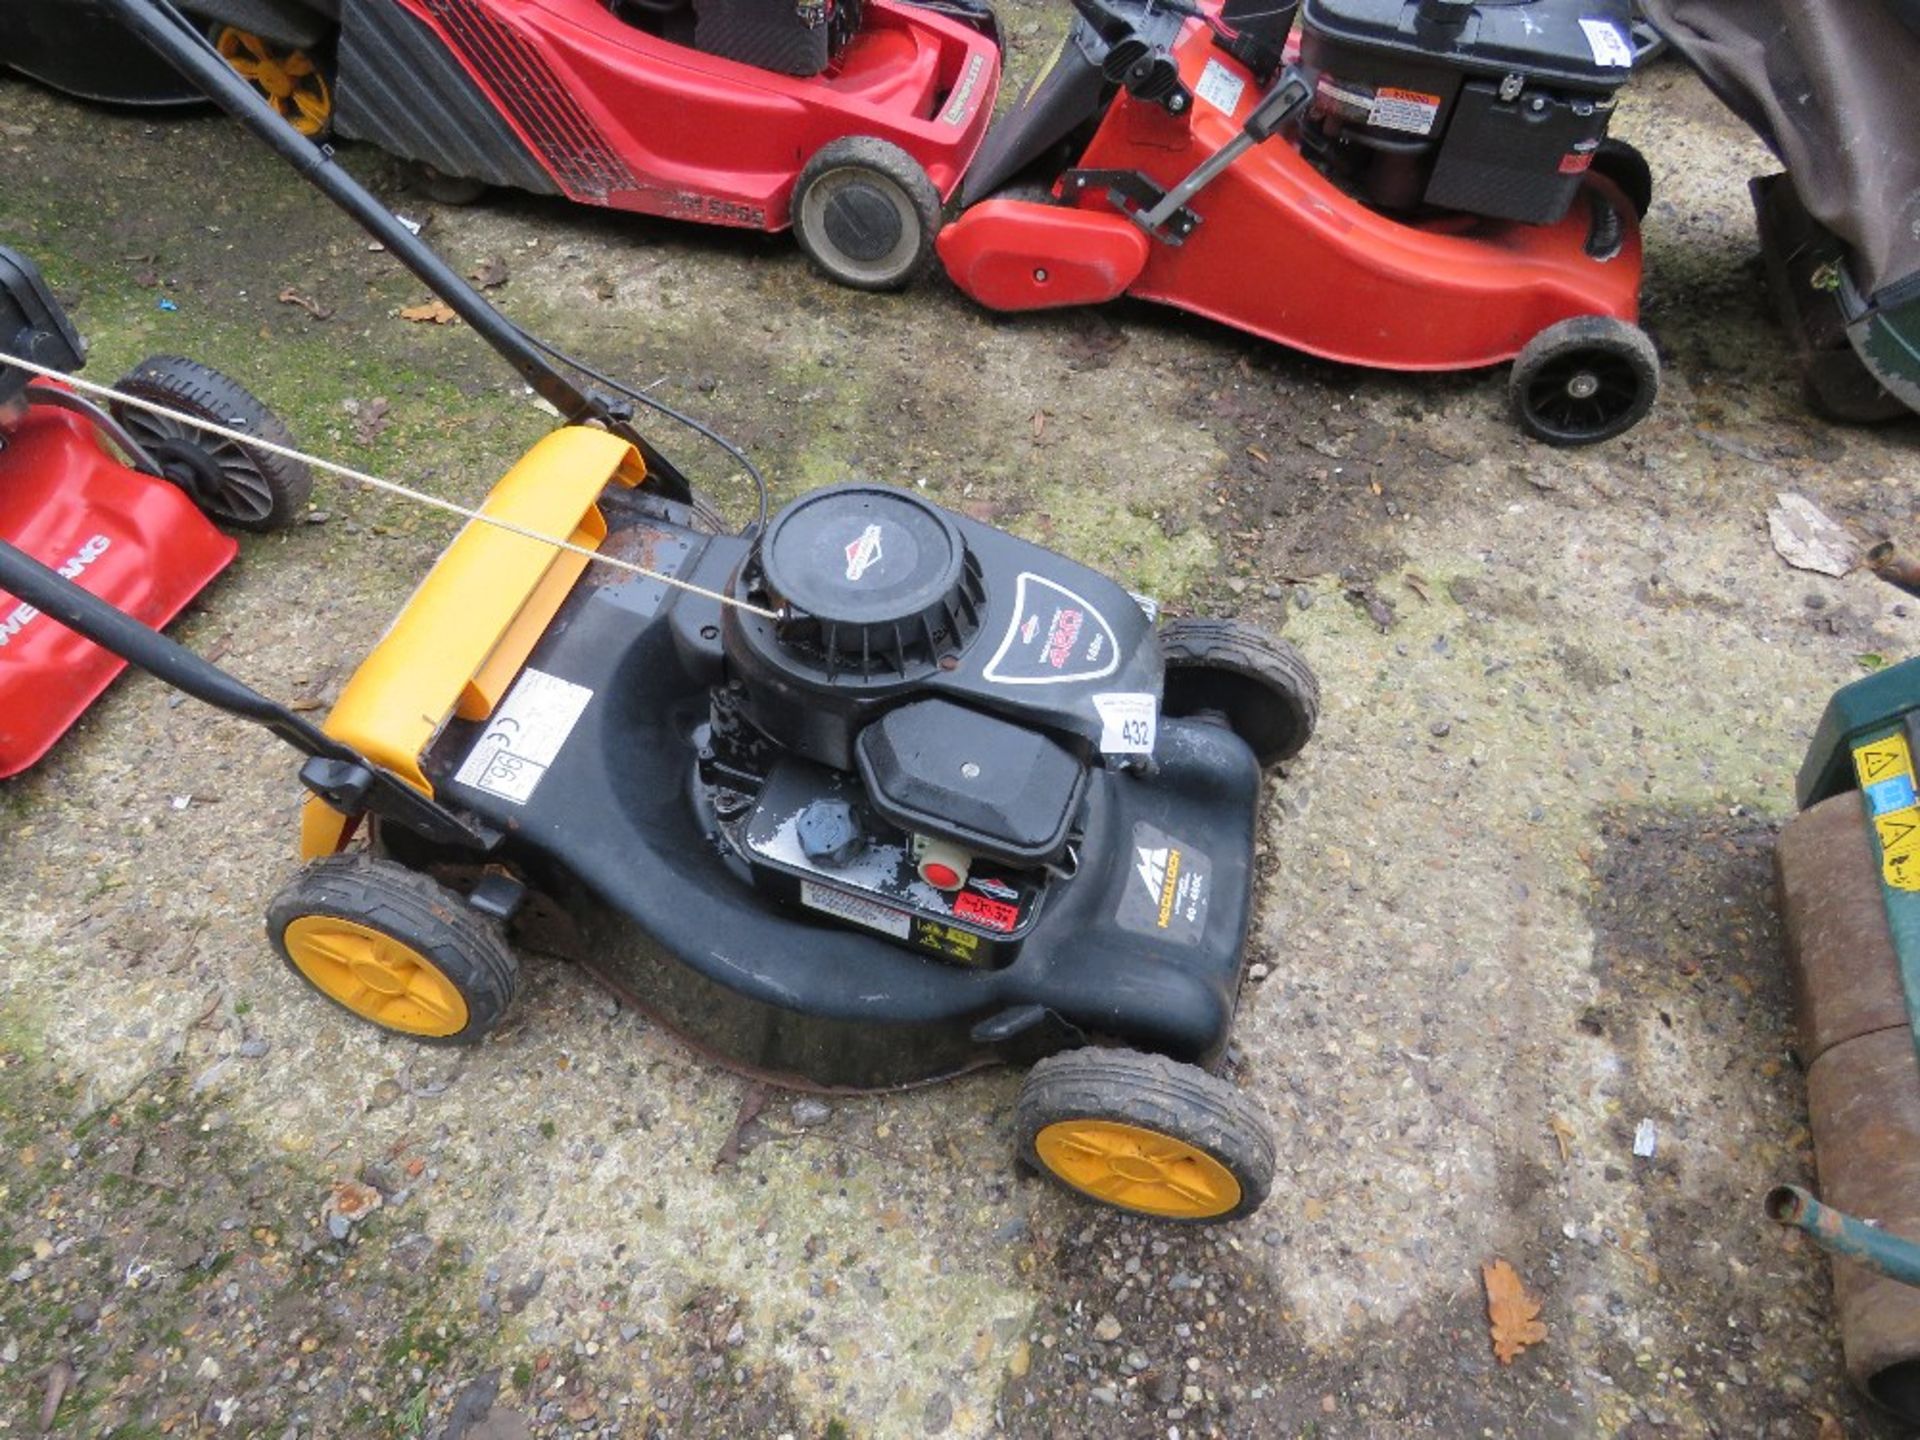 McCULLOCH PETROL ENGINED LAWN MOWER, NO BOX. THIS LOT IS SOLD UNDER THE AUCTIONEERS MARGIN SCHEME